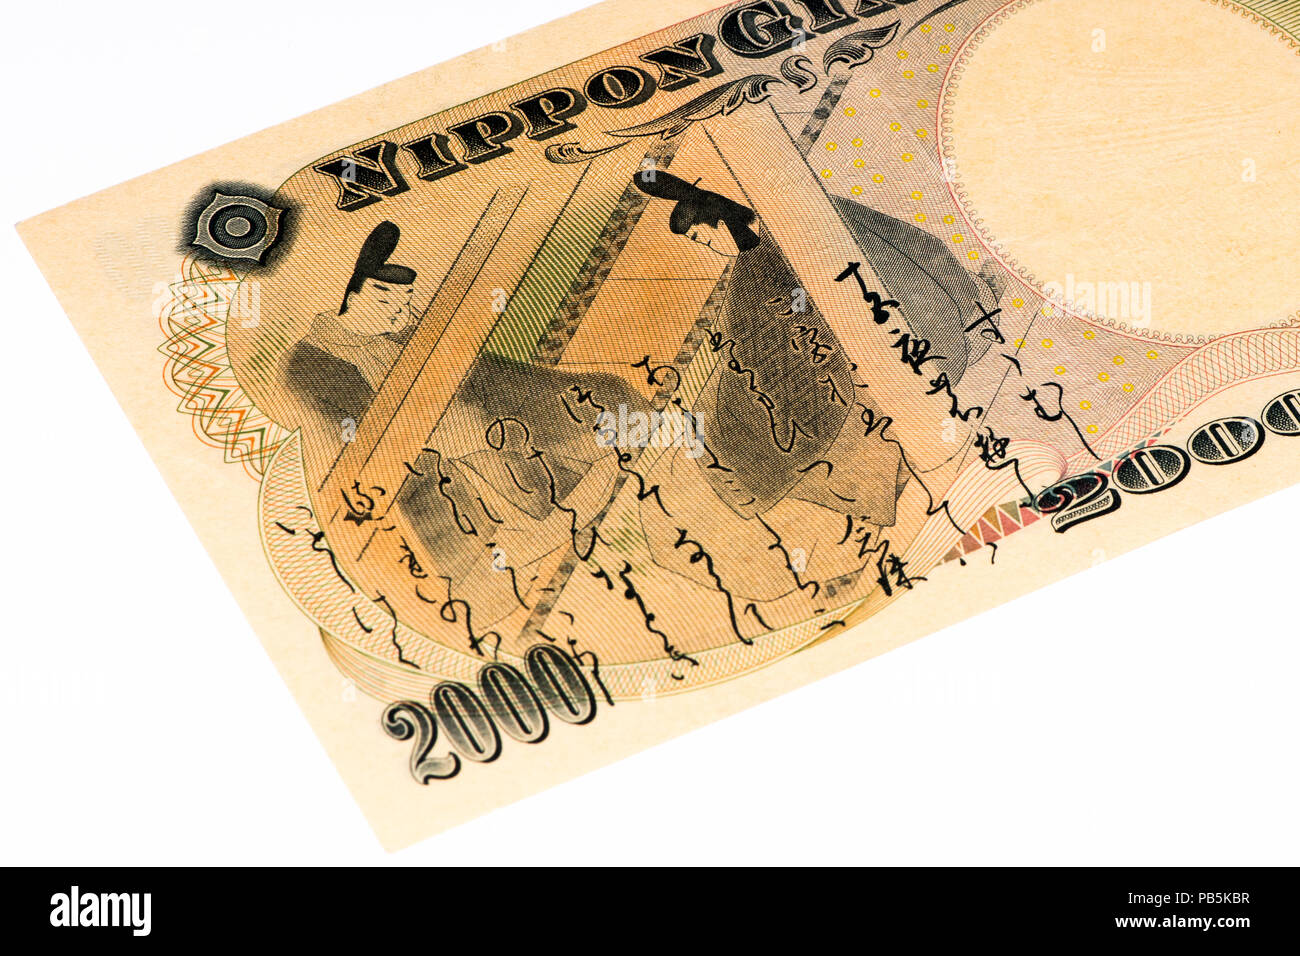 2000 Japanese yens bank note. Japanese yen is the national currency of Japan Stock Photo